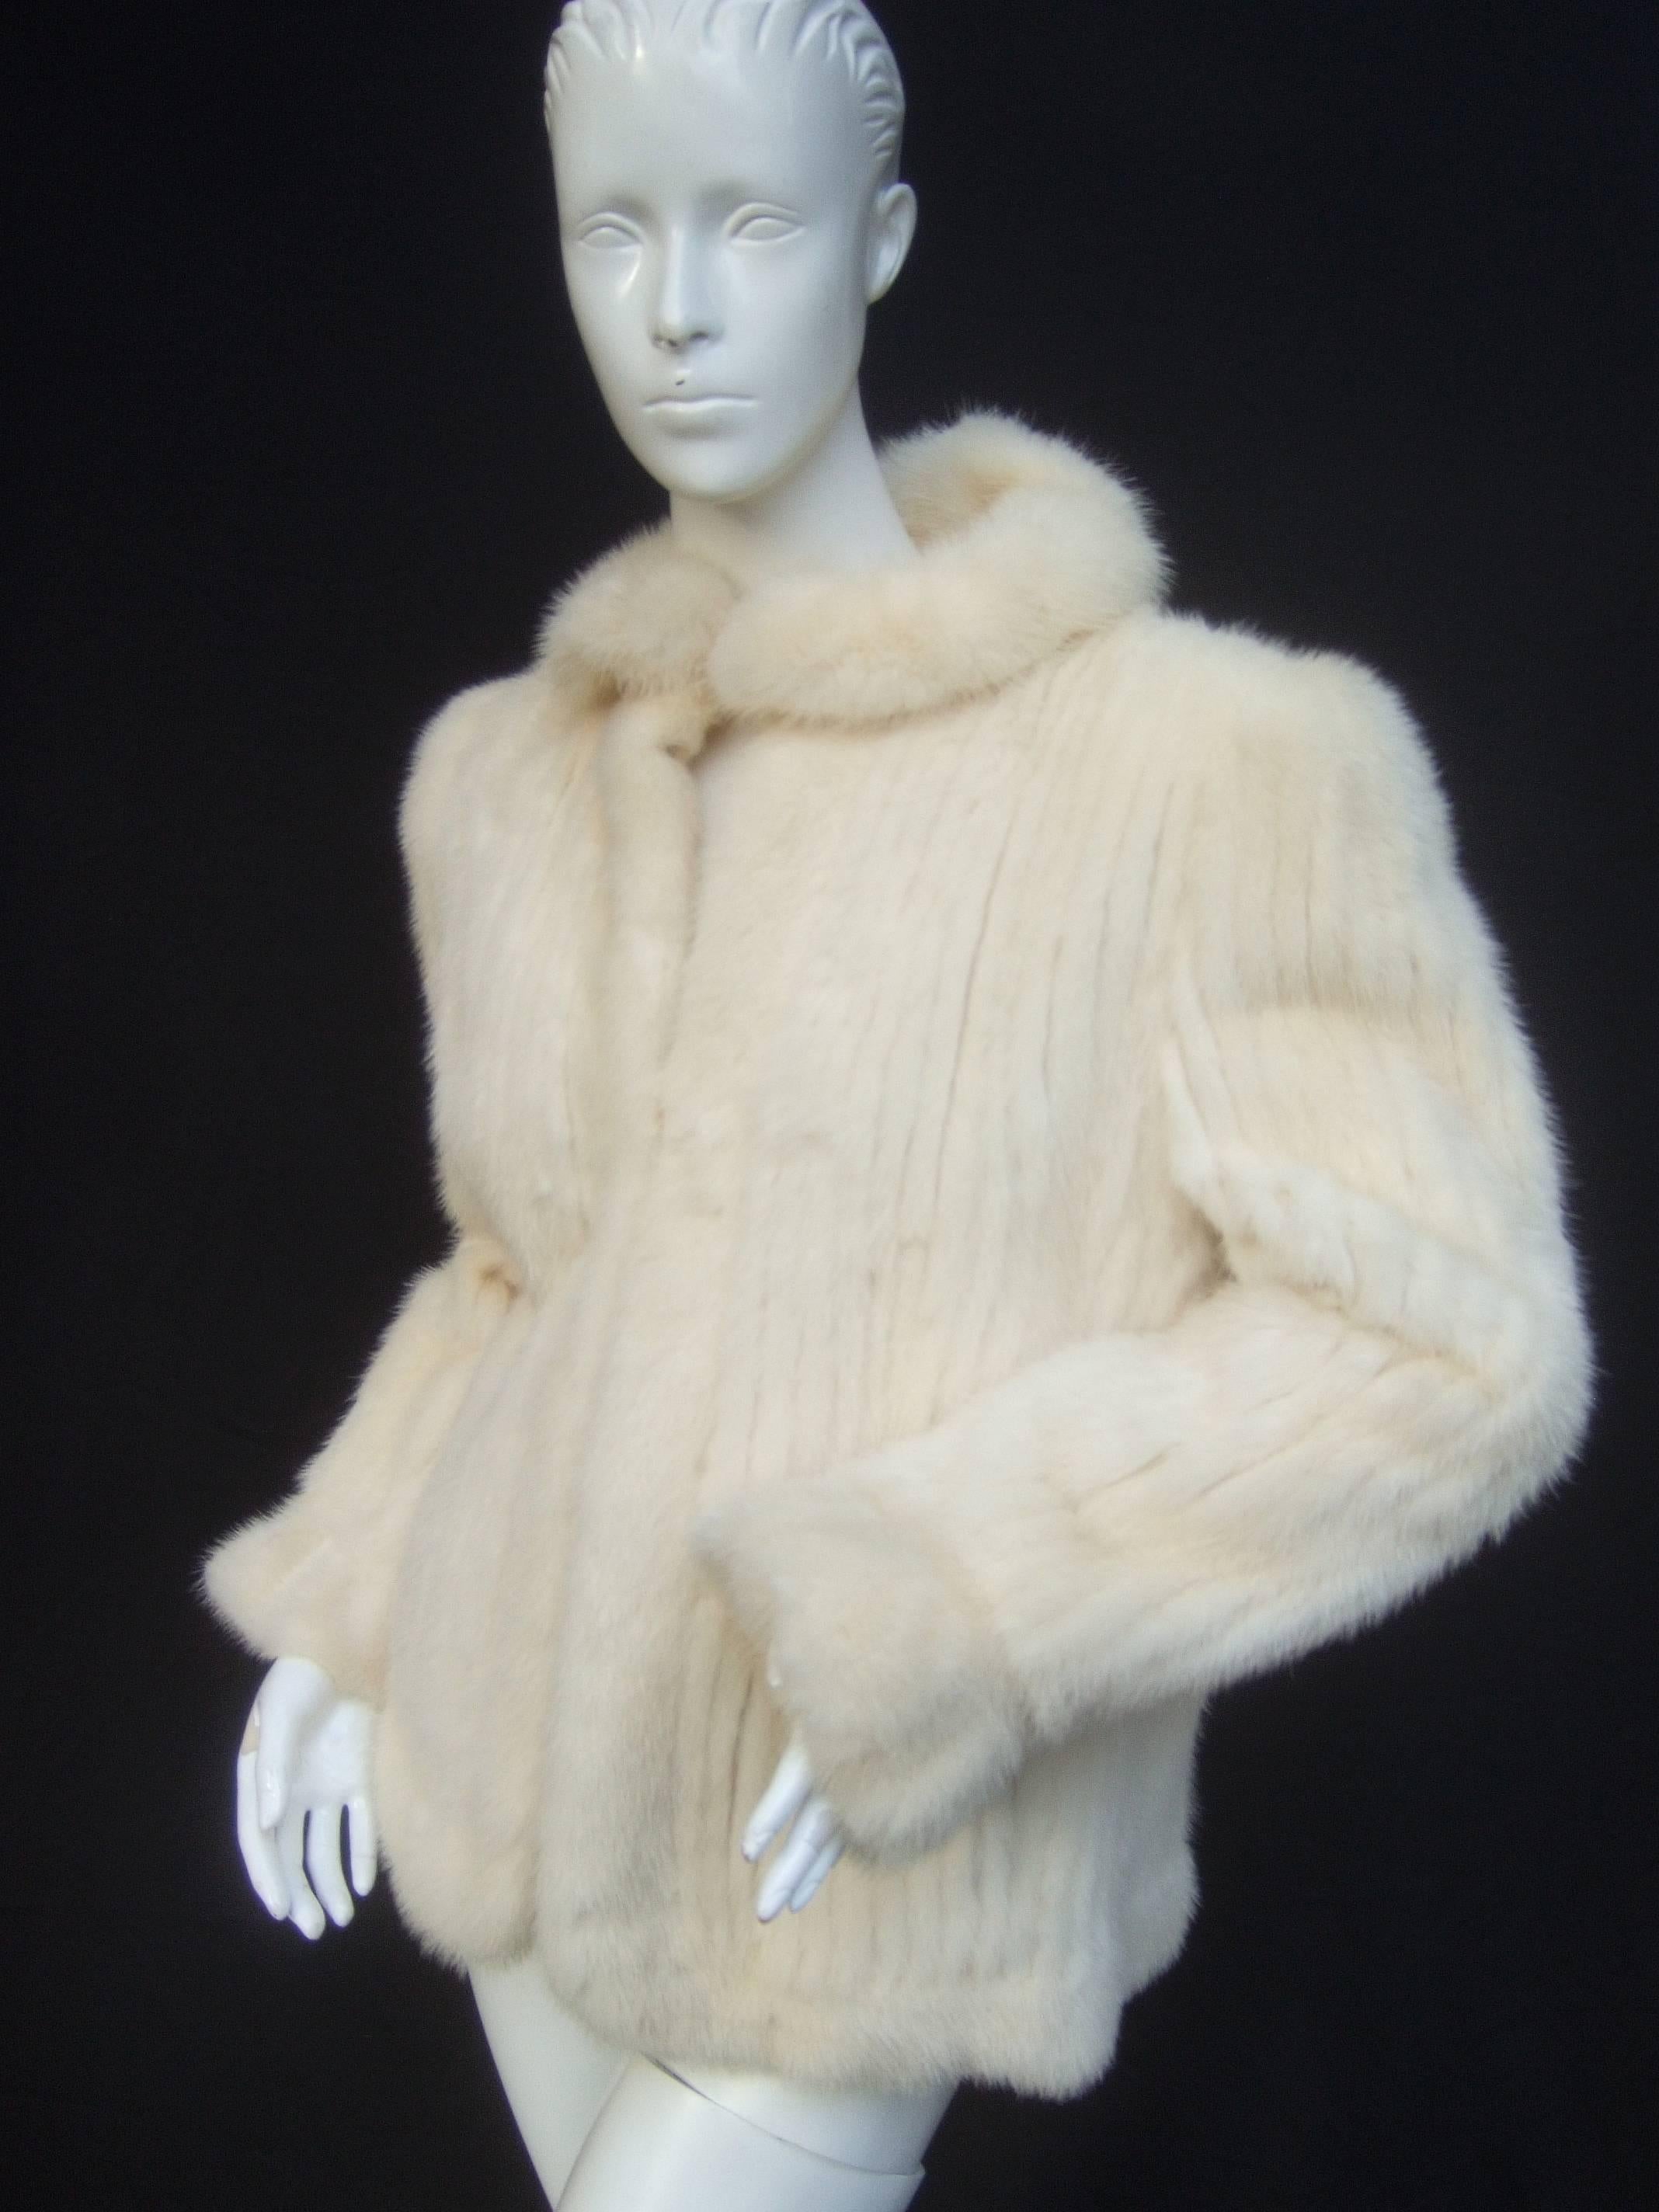 Luxurious ribbed pearl mink fur jacket c 1980s
The elegant vintage fur jacket is designed 
with plush mink fur throughout

The collar, center opening, hemline and 
cuffs are framed with mink fur bands 
The front, backside and sleeves